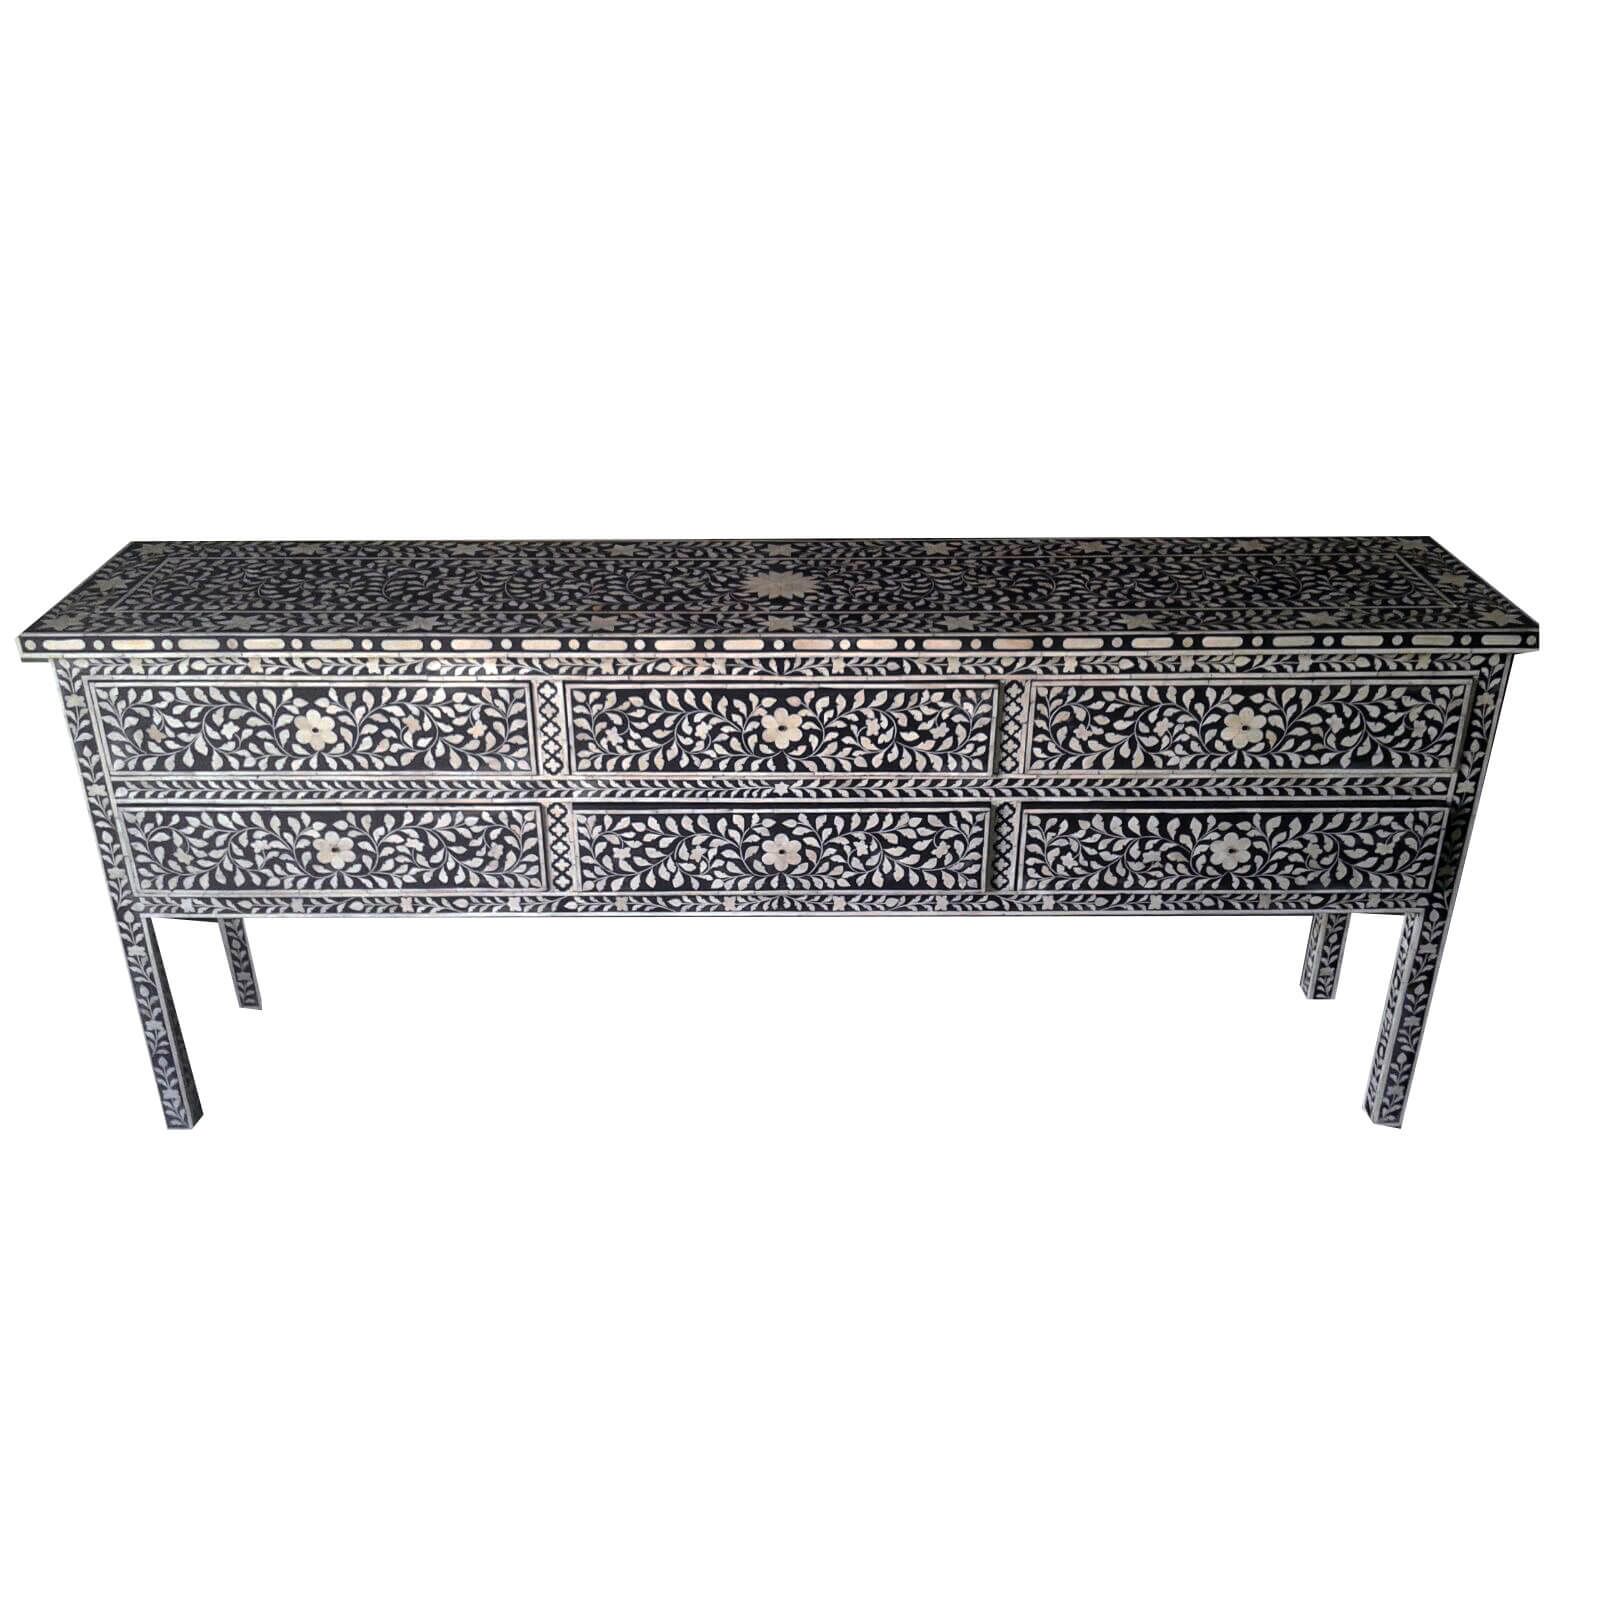 Black Bone Inlay Large Sideboard | Iris Furnishing Throughout Black And White Inlay Console Tables (View 16 of 30)